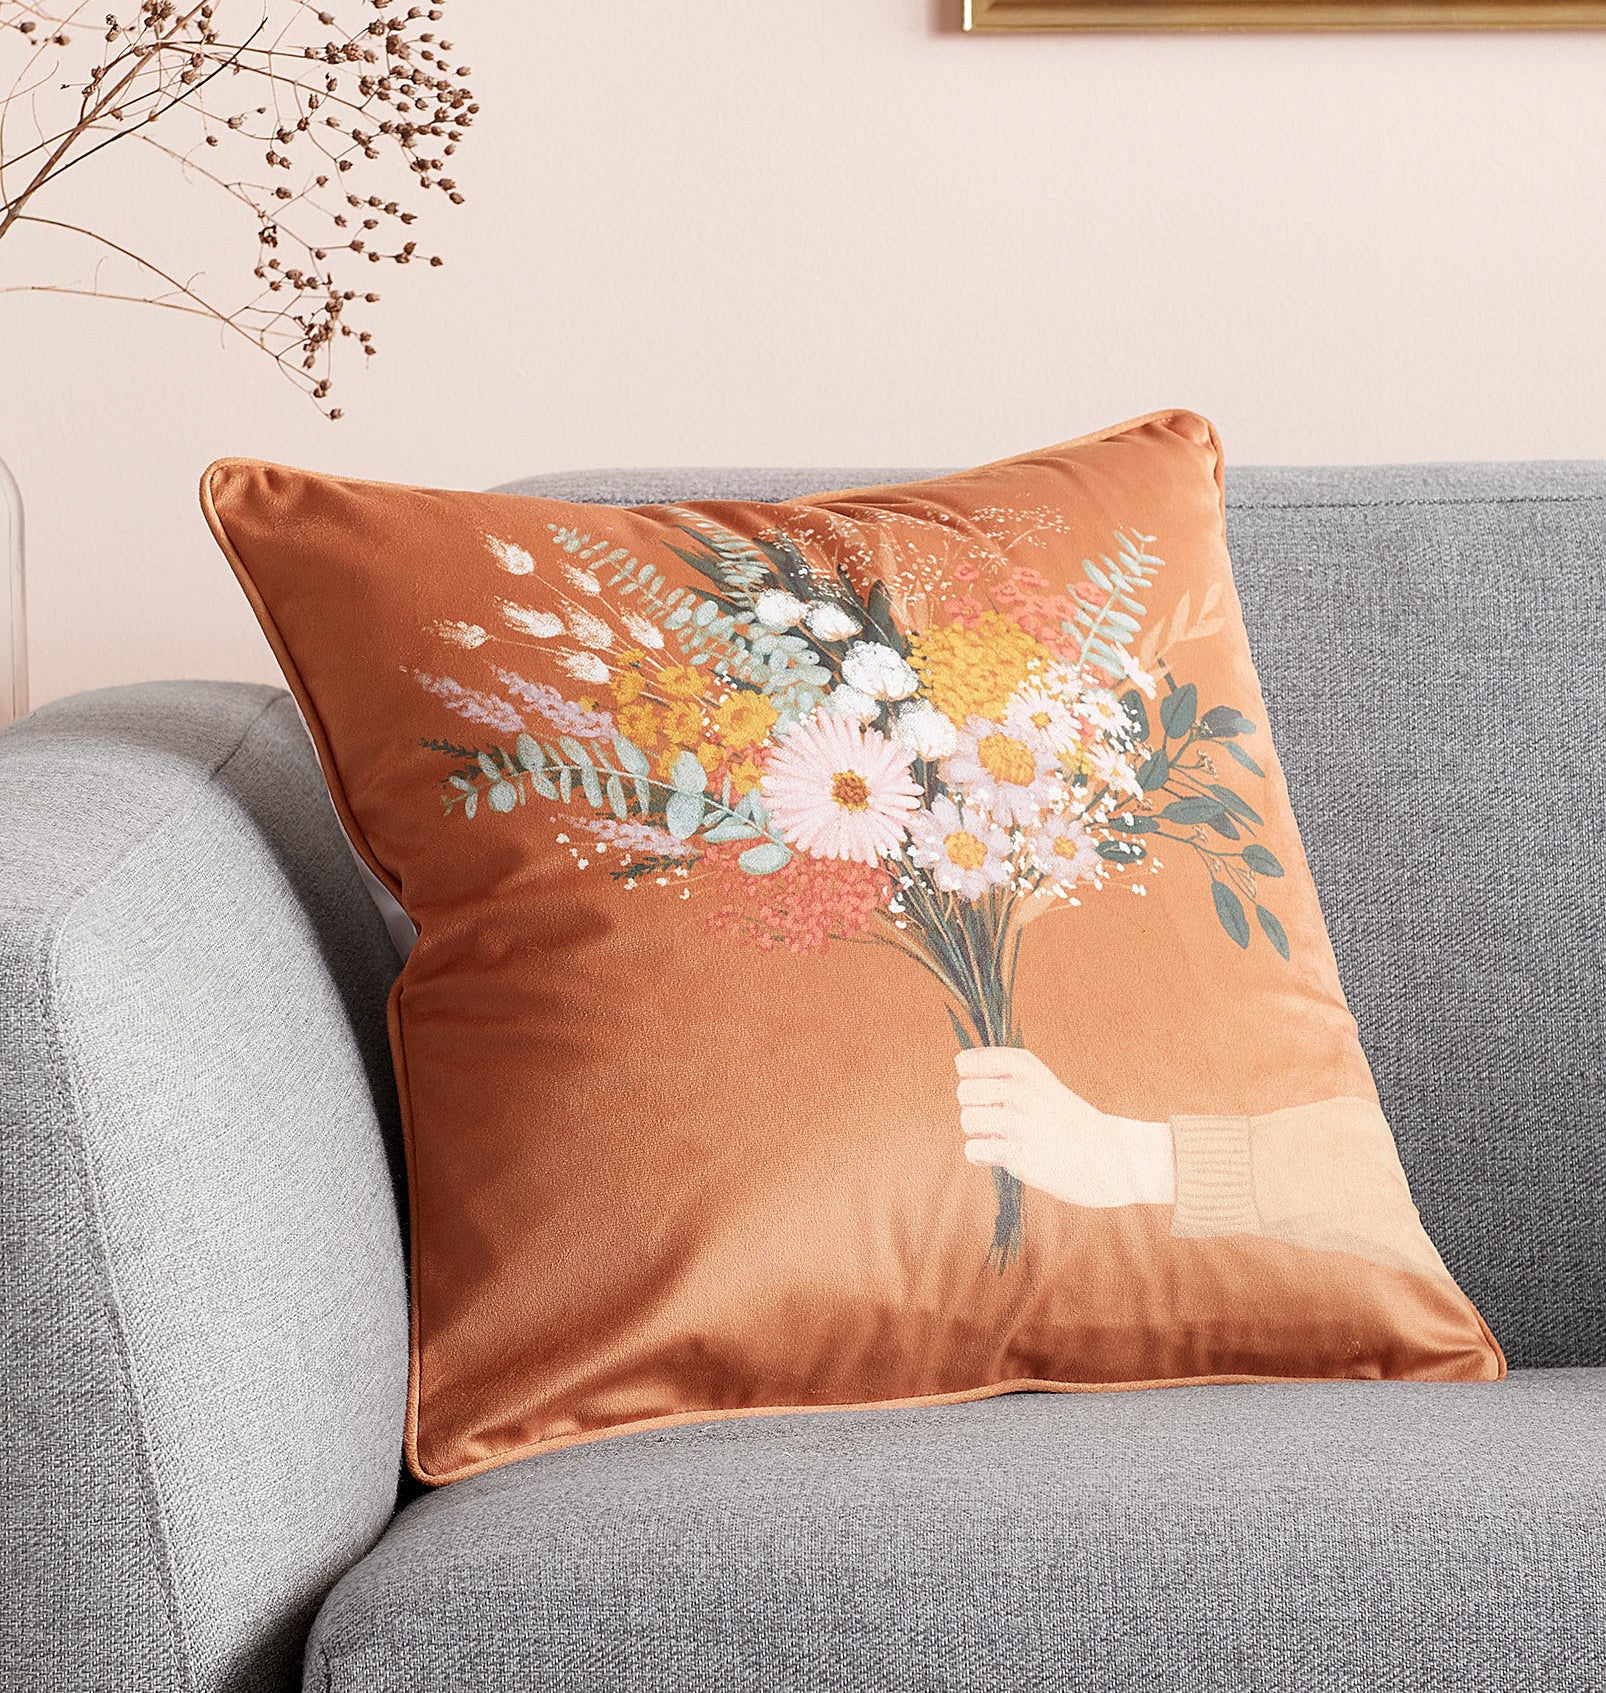 A floral throw pillow on a couch